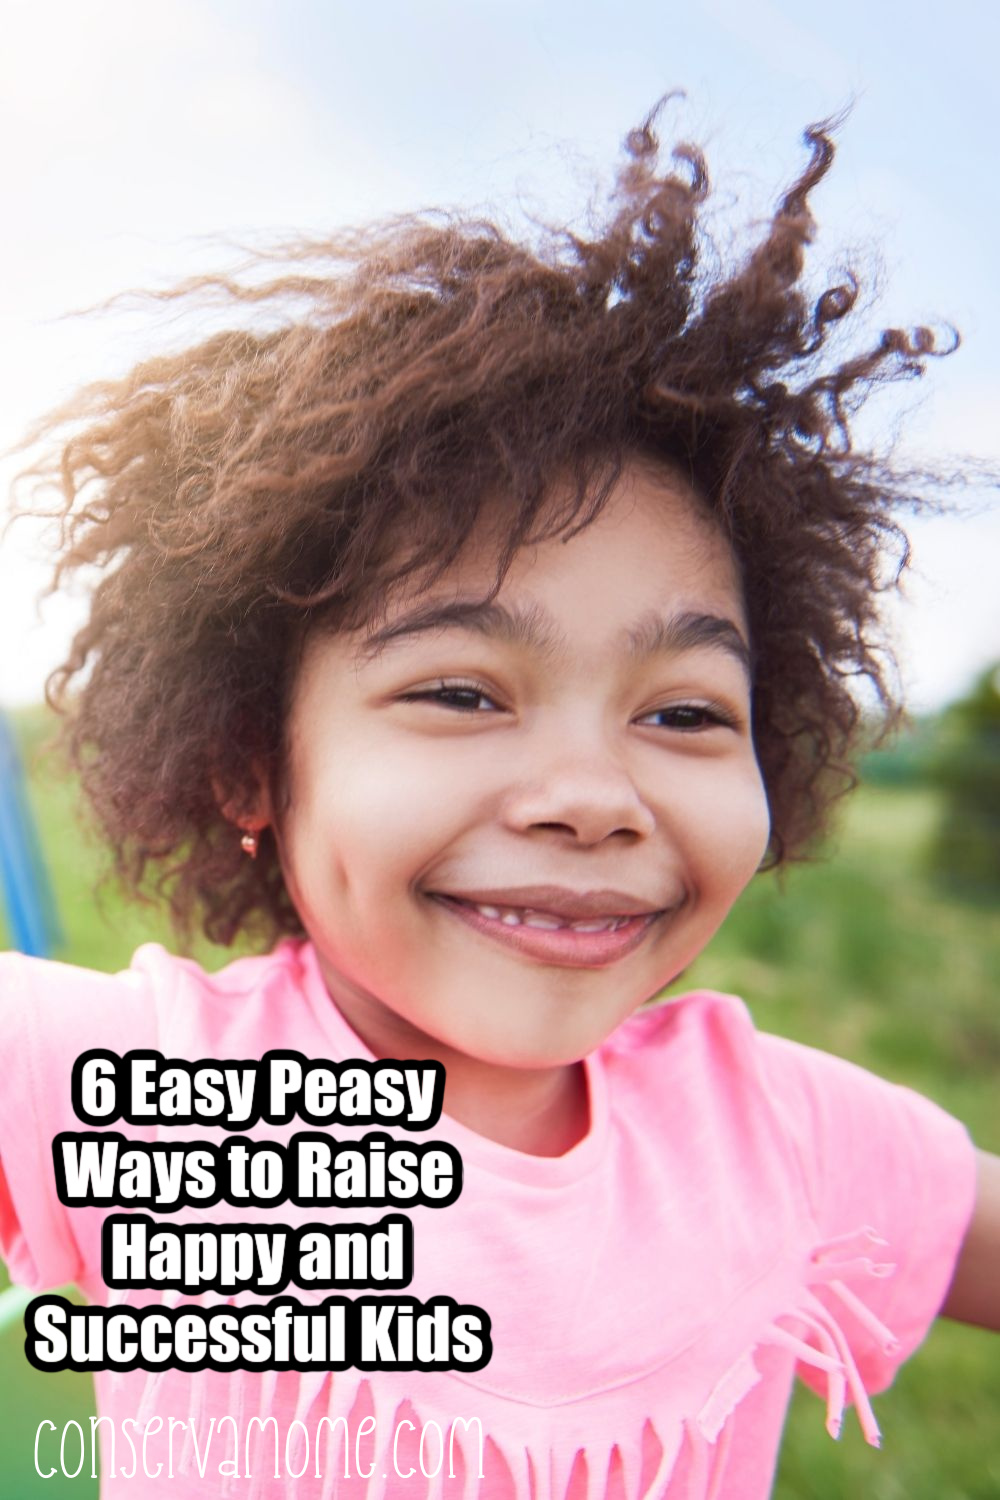 6 Easy Peasy Ways to Raise Happy and Successful Kids